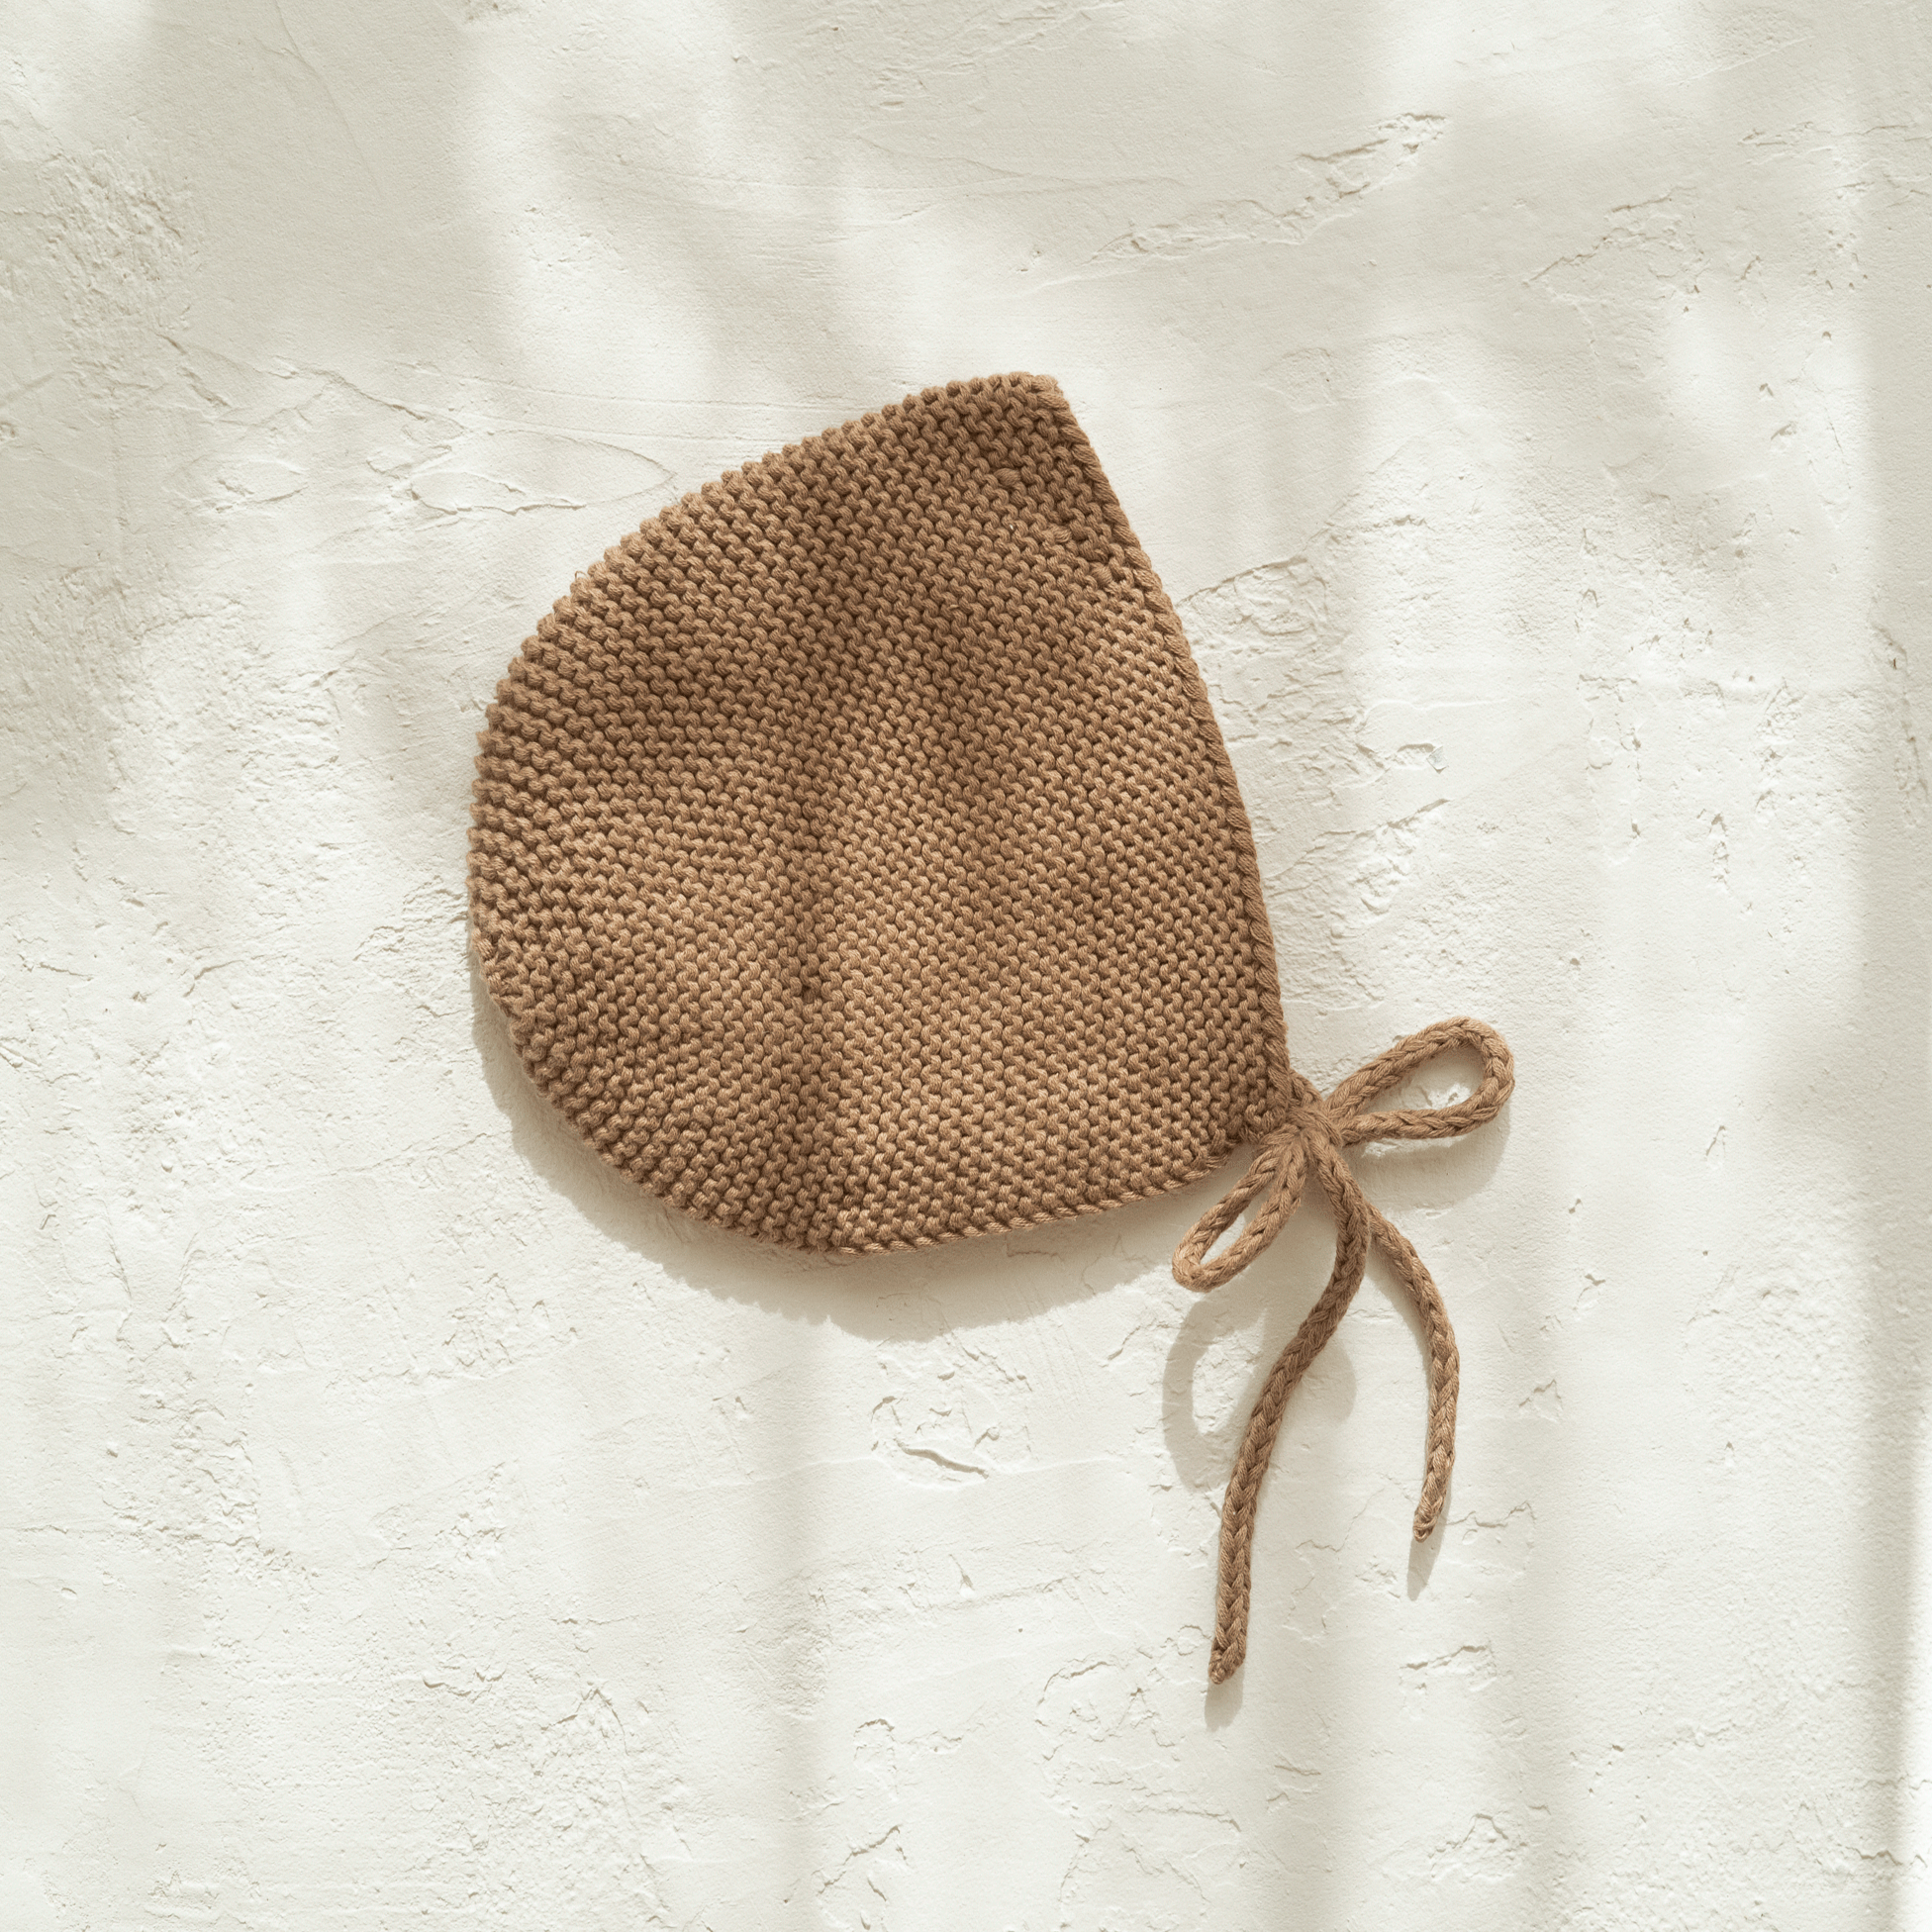 A Illoura baby bonnet | chocolate hanging on a wall.